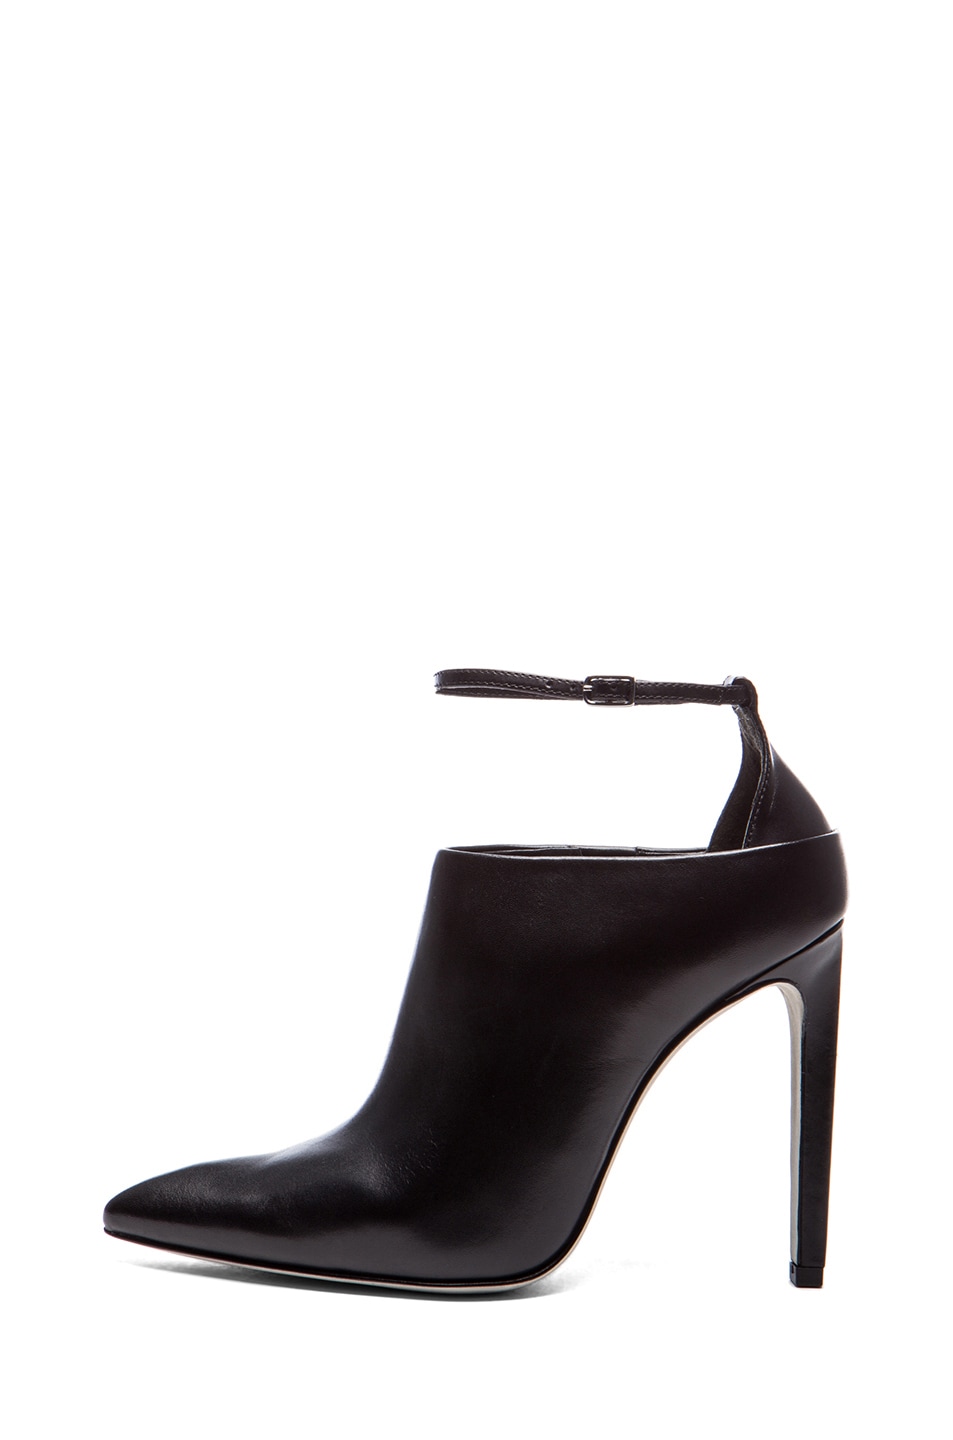 Image 1 of Alexander Wang Audrey Leather Booties in Black